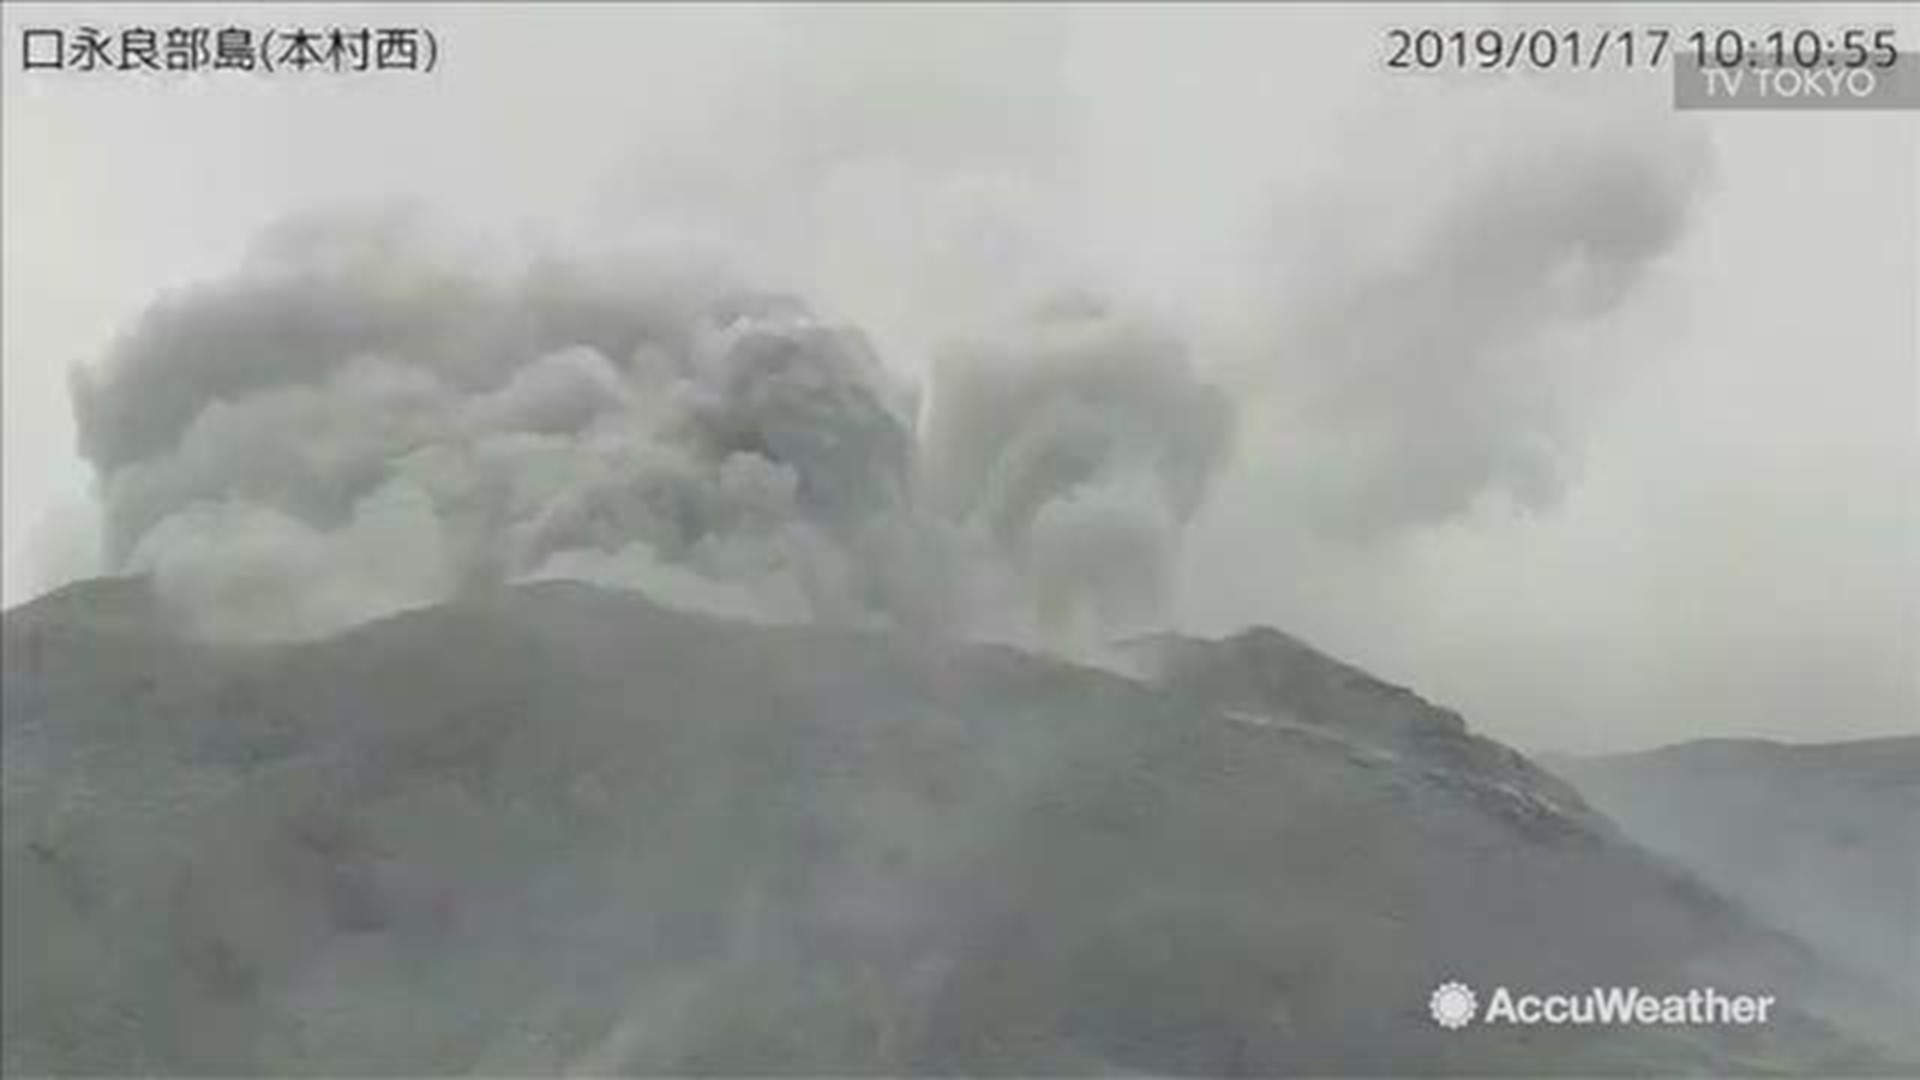 A volcano erupted in southern Japan sending massive amounts of thick smoke into the air. The eruption did not reach residential neighborhoods, so no evacuations were needed.